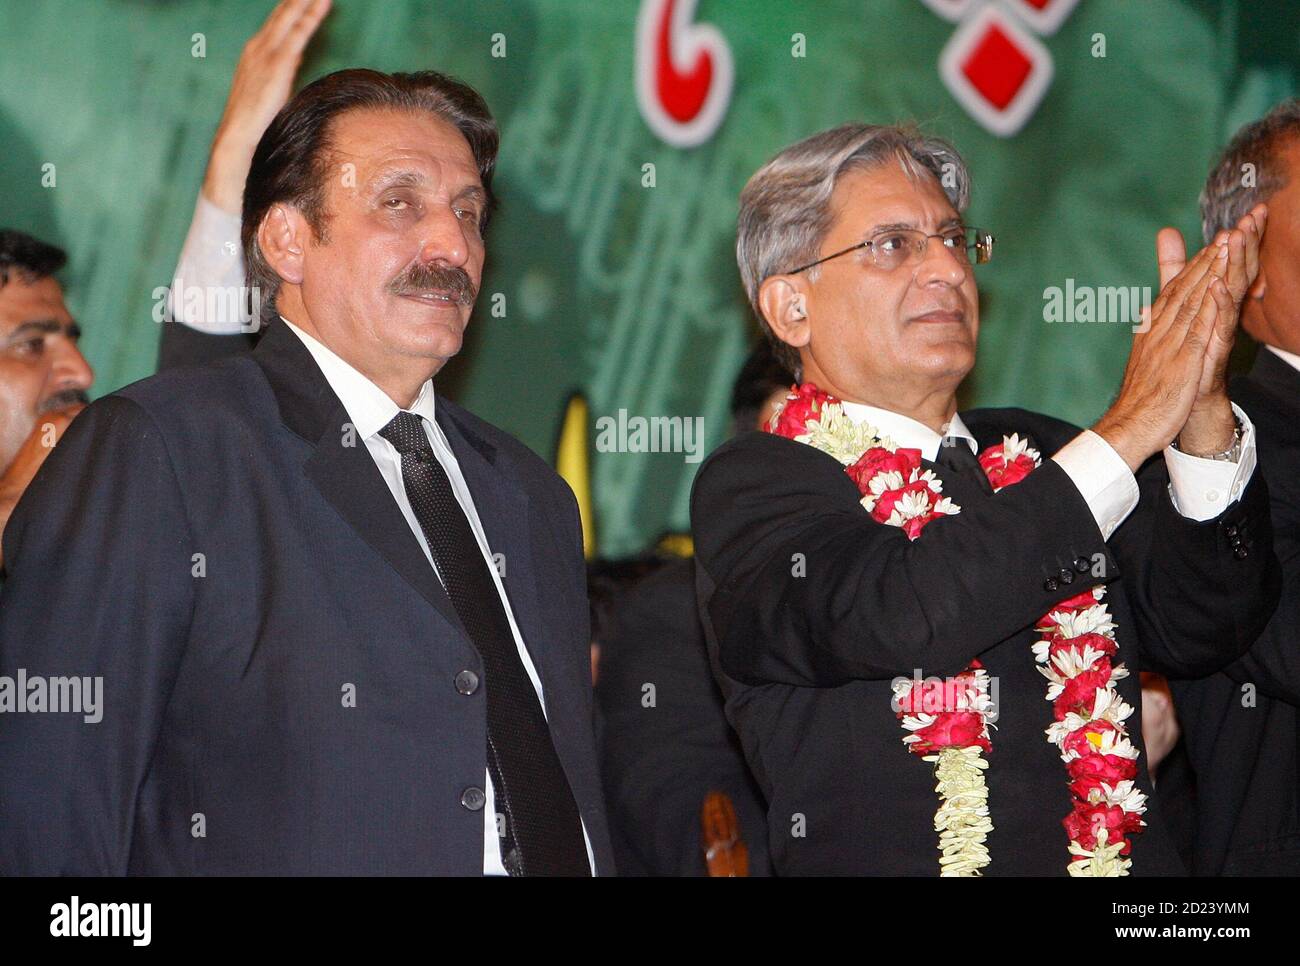 pakistans-deposed-chief-justice-iftikhar-chaudhry-l-and-aitzaz-ahsan-leader-of-the-lawyers-movement-gesture-during-lawyers-convention-in-lahore-june-12-2008-hundreds-of-pakistani-lawyers-and-political-activists-began-a-cross-country-rally-on-wednesday-to-press-the-new-government-to-restore-judges-president-pervez-musharraf-fired-reutersmohsin-raza-pakistan-2D23YMM.jpg